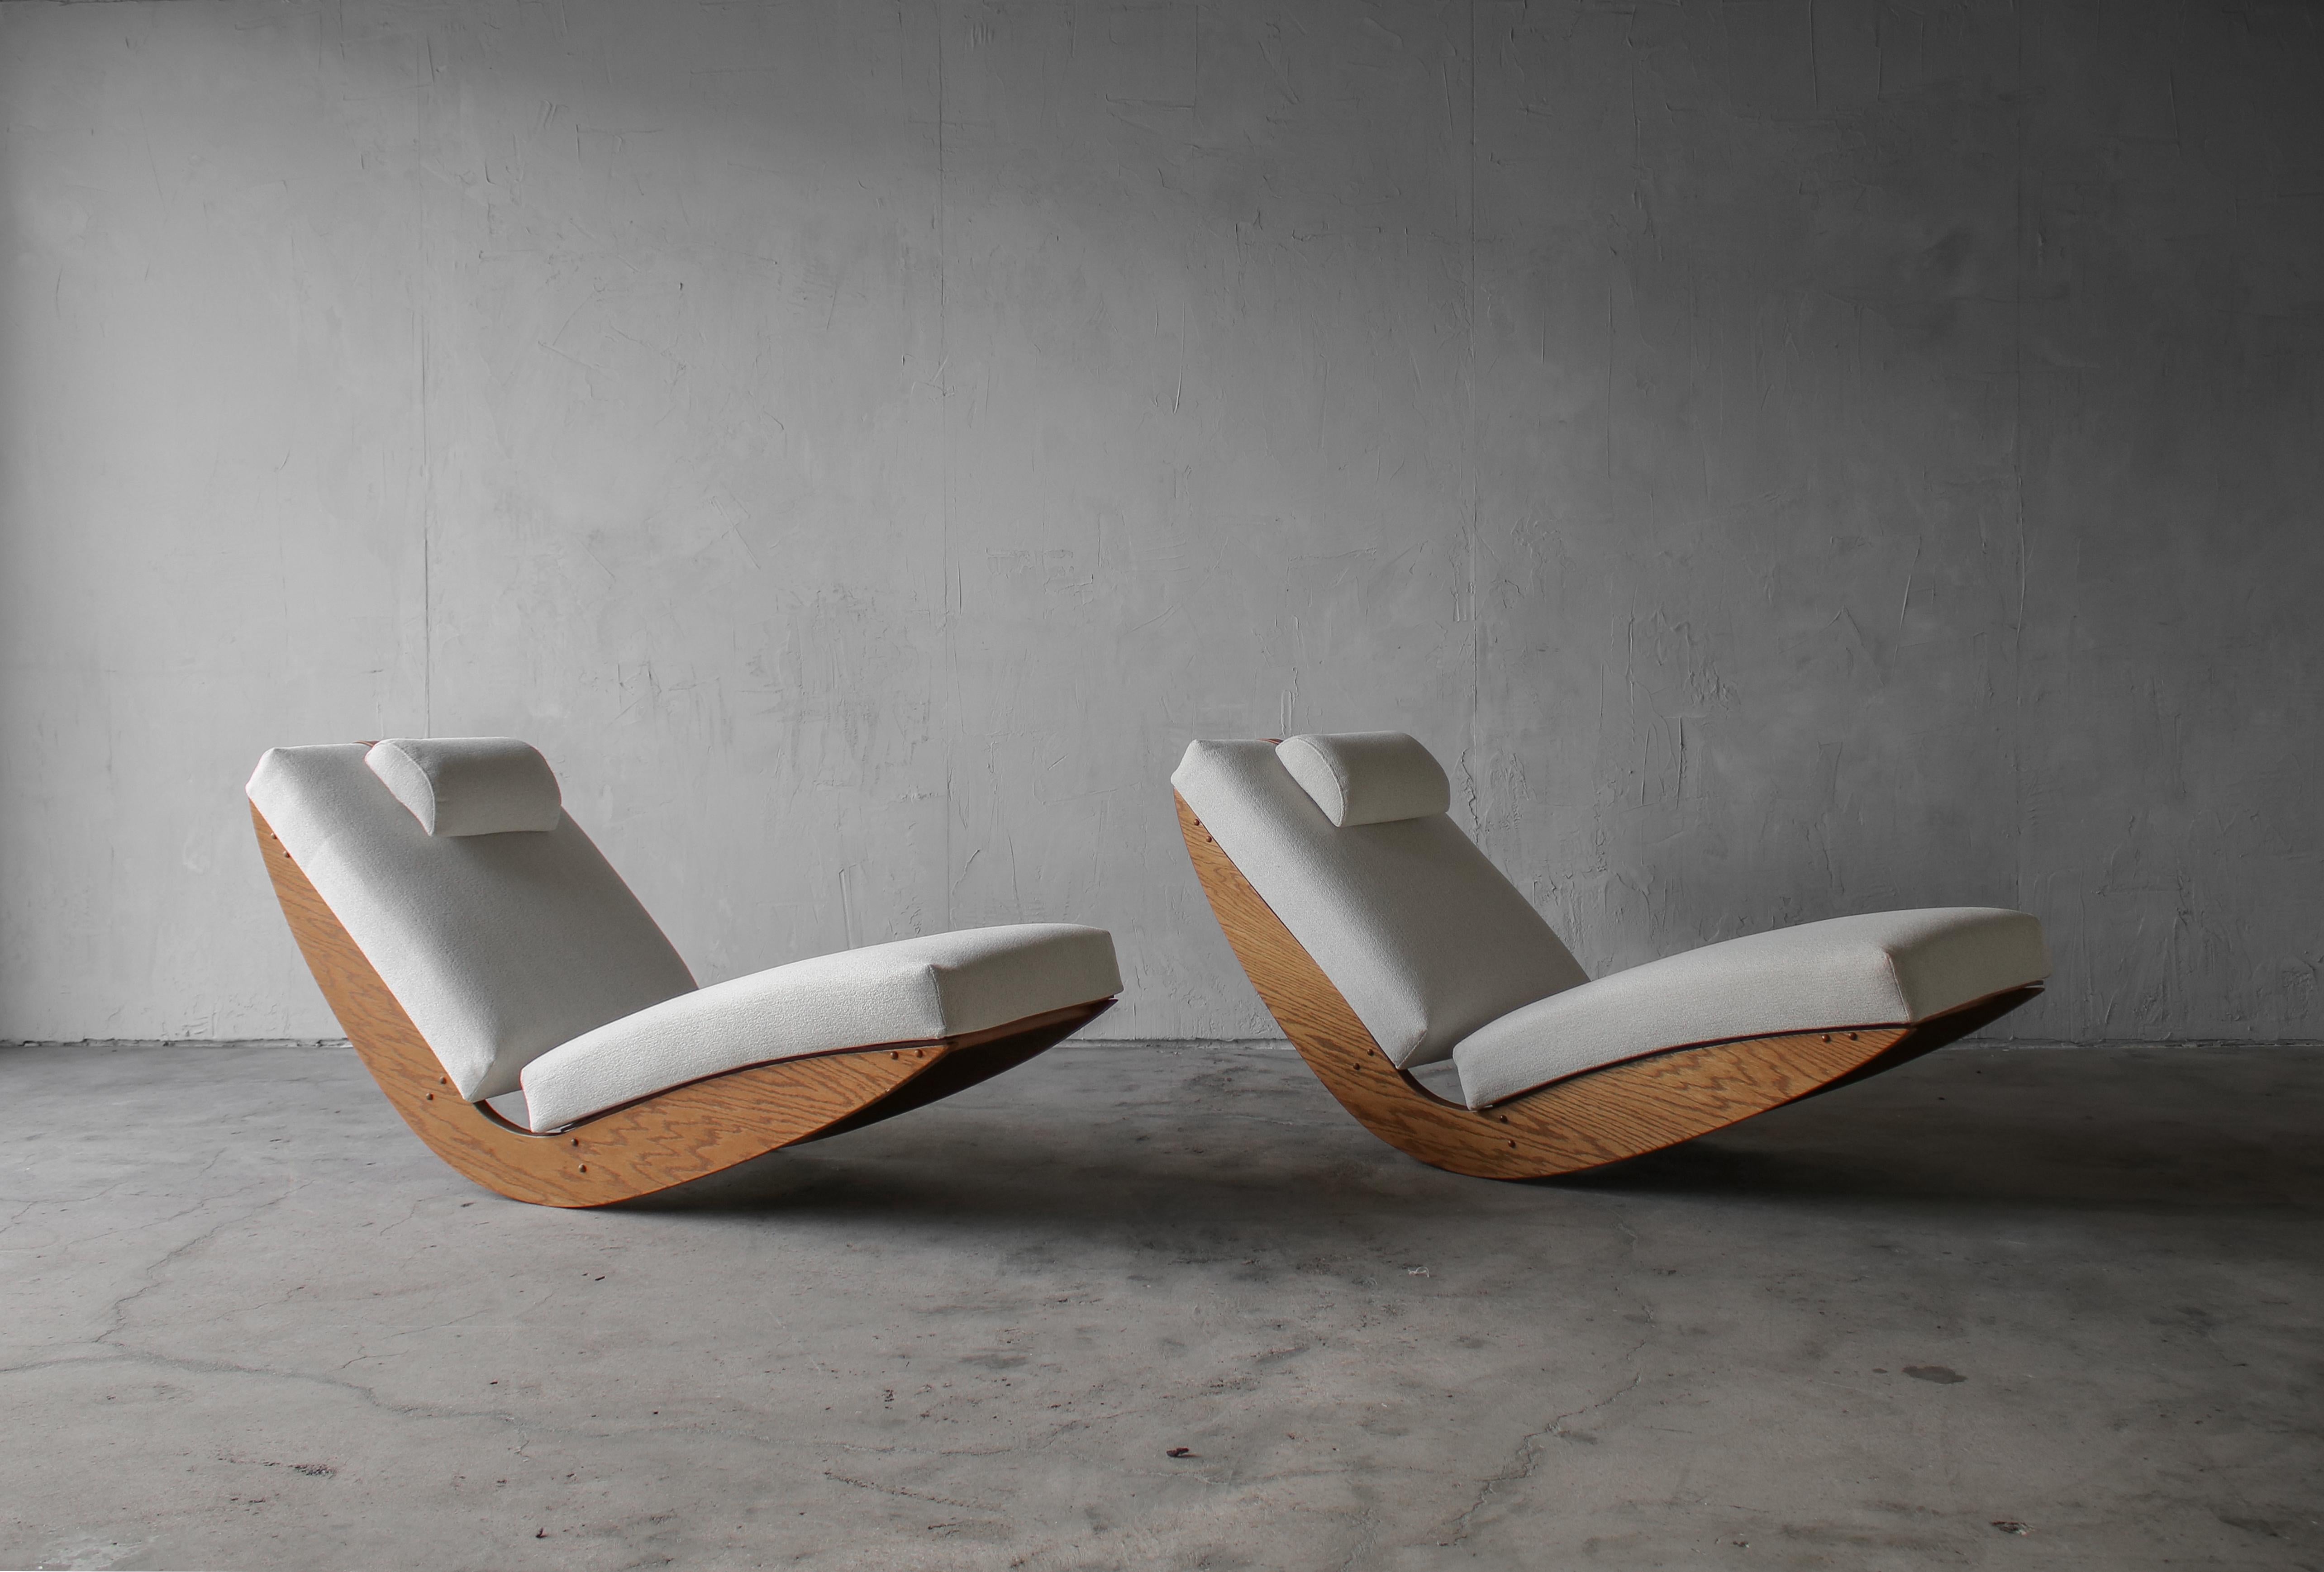 Most likely a custom order or one of a kind pair from the 1970s or 1980s. This great pair of bespoke oak rocking lounge chairs has a very craftsman appeal. If you've been looking for that unique, pair of statement chairs, look no further. These